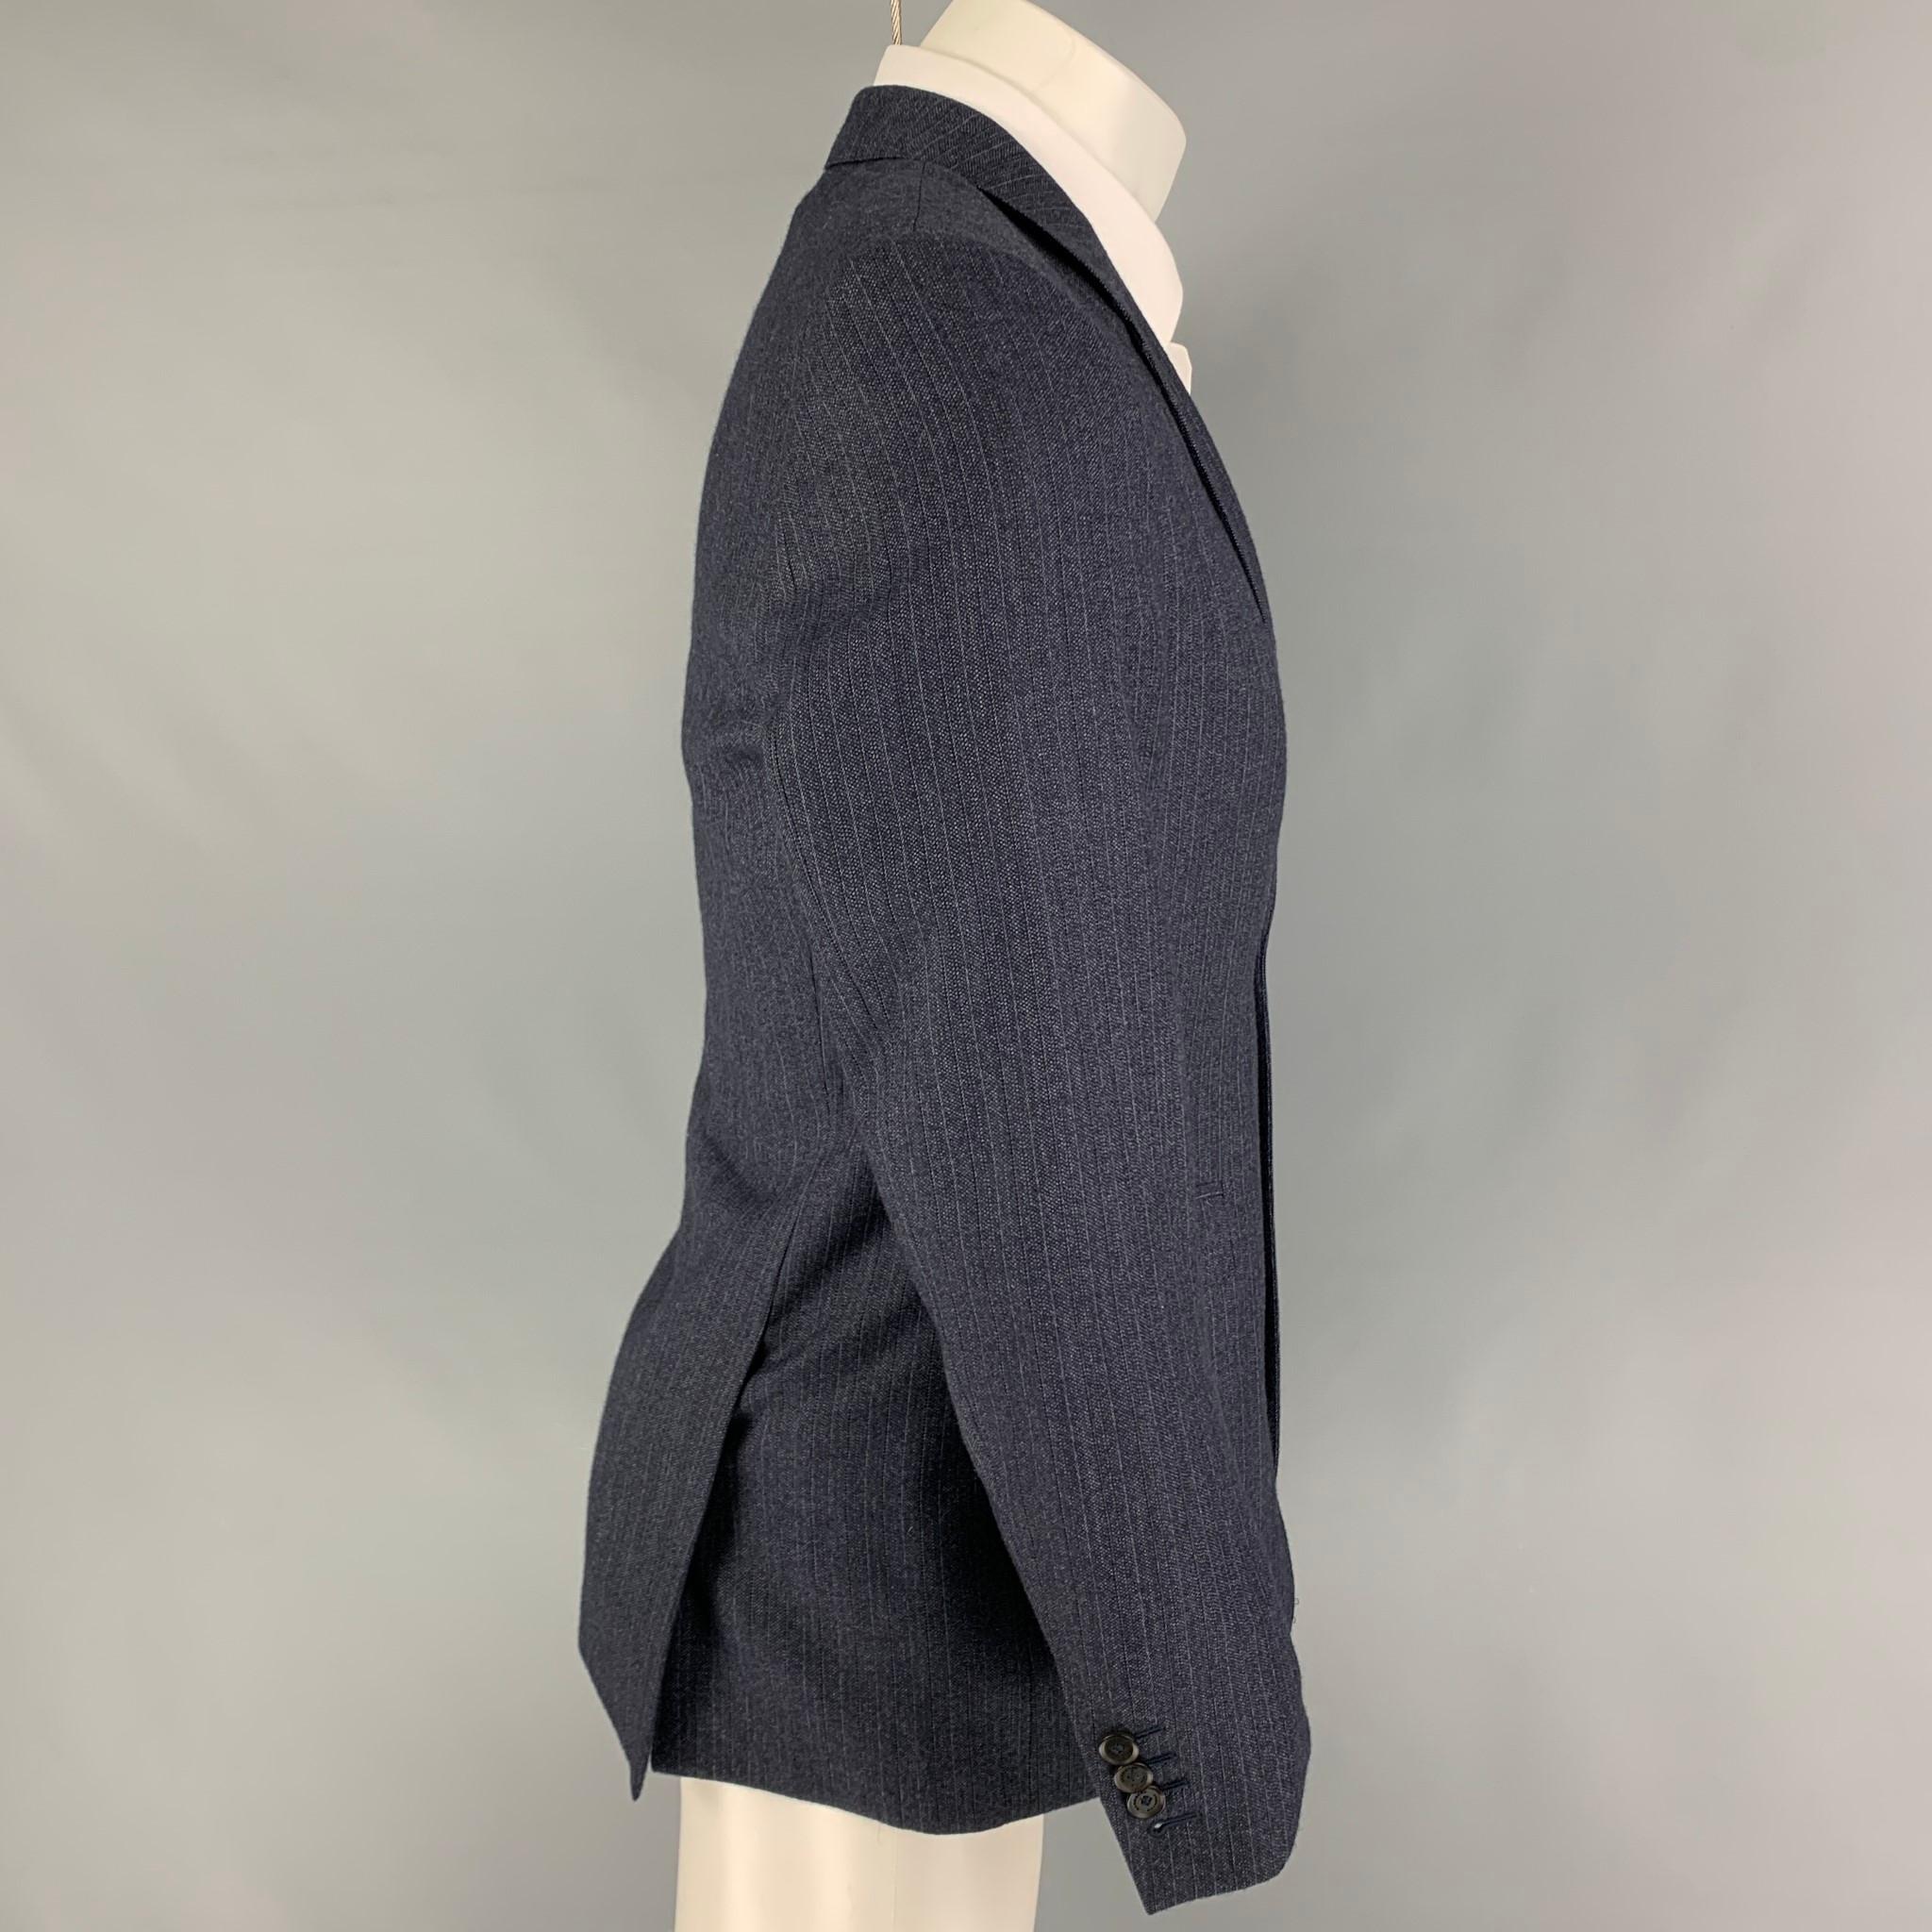 BURBERRY PRORSUM sport coat comes in a navy stripe wool with a full liner featuring a notch lapel, flap pockets, double back vent, and a double button closure. 

Very Good Pre-Owned Condition.
Marked: 50

Measurements:

Shoulder: 17 in.
Chest: 40